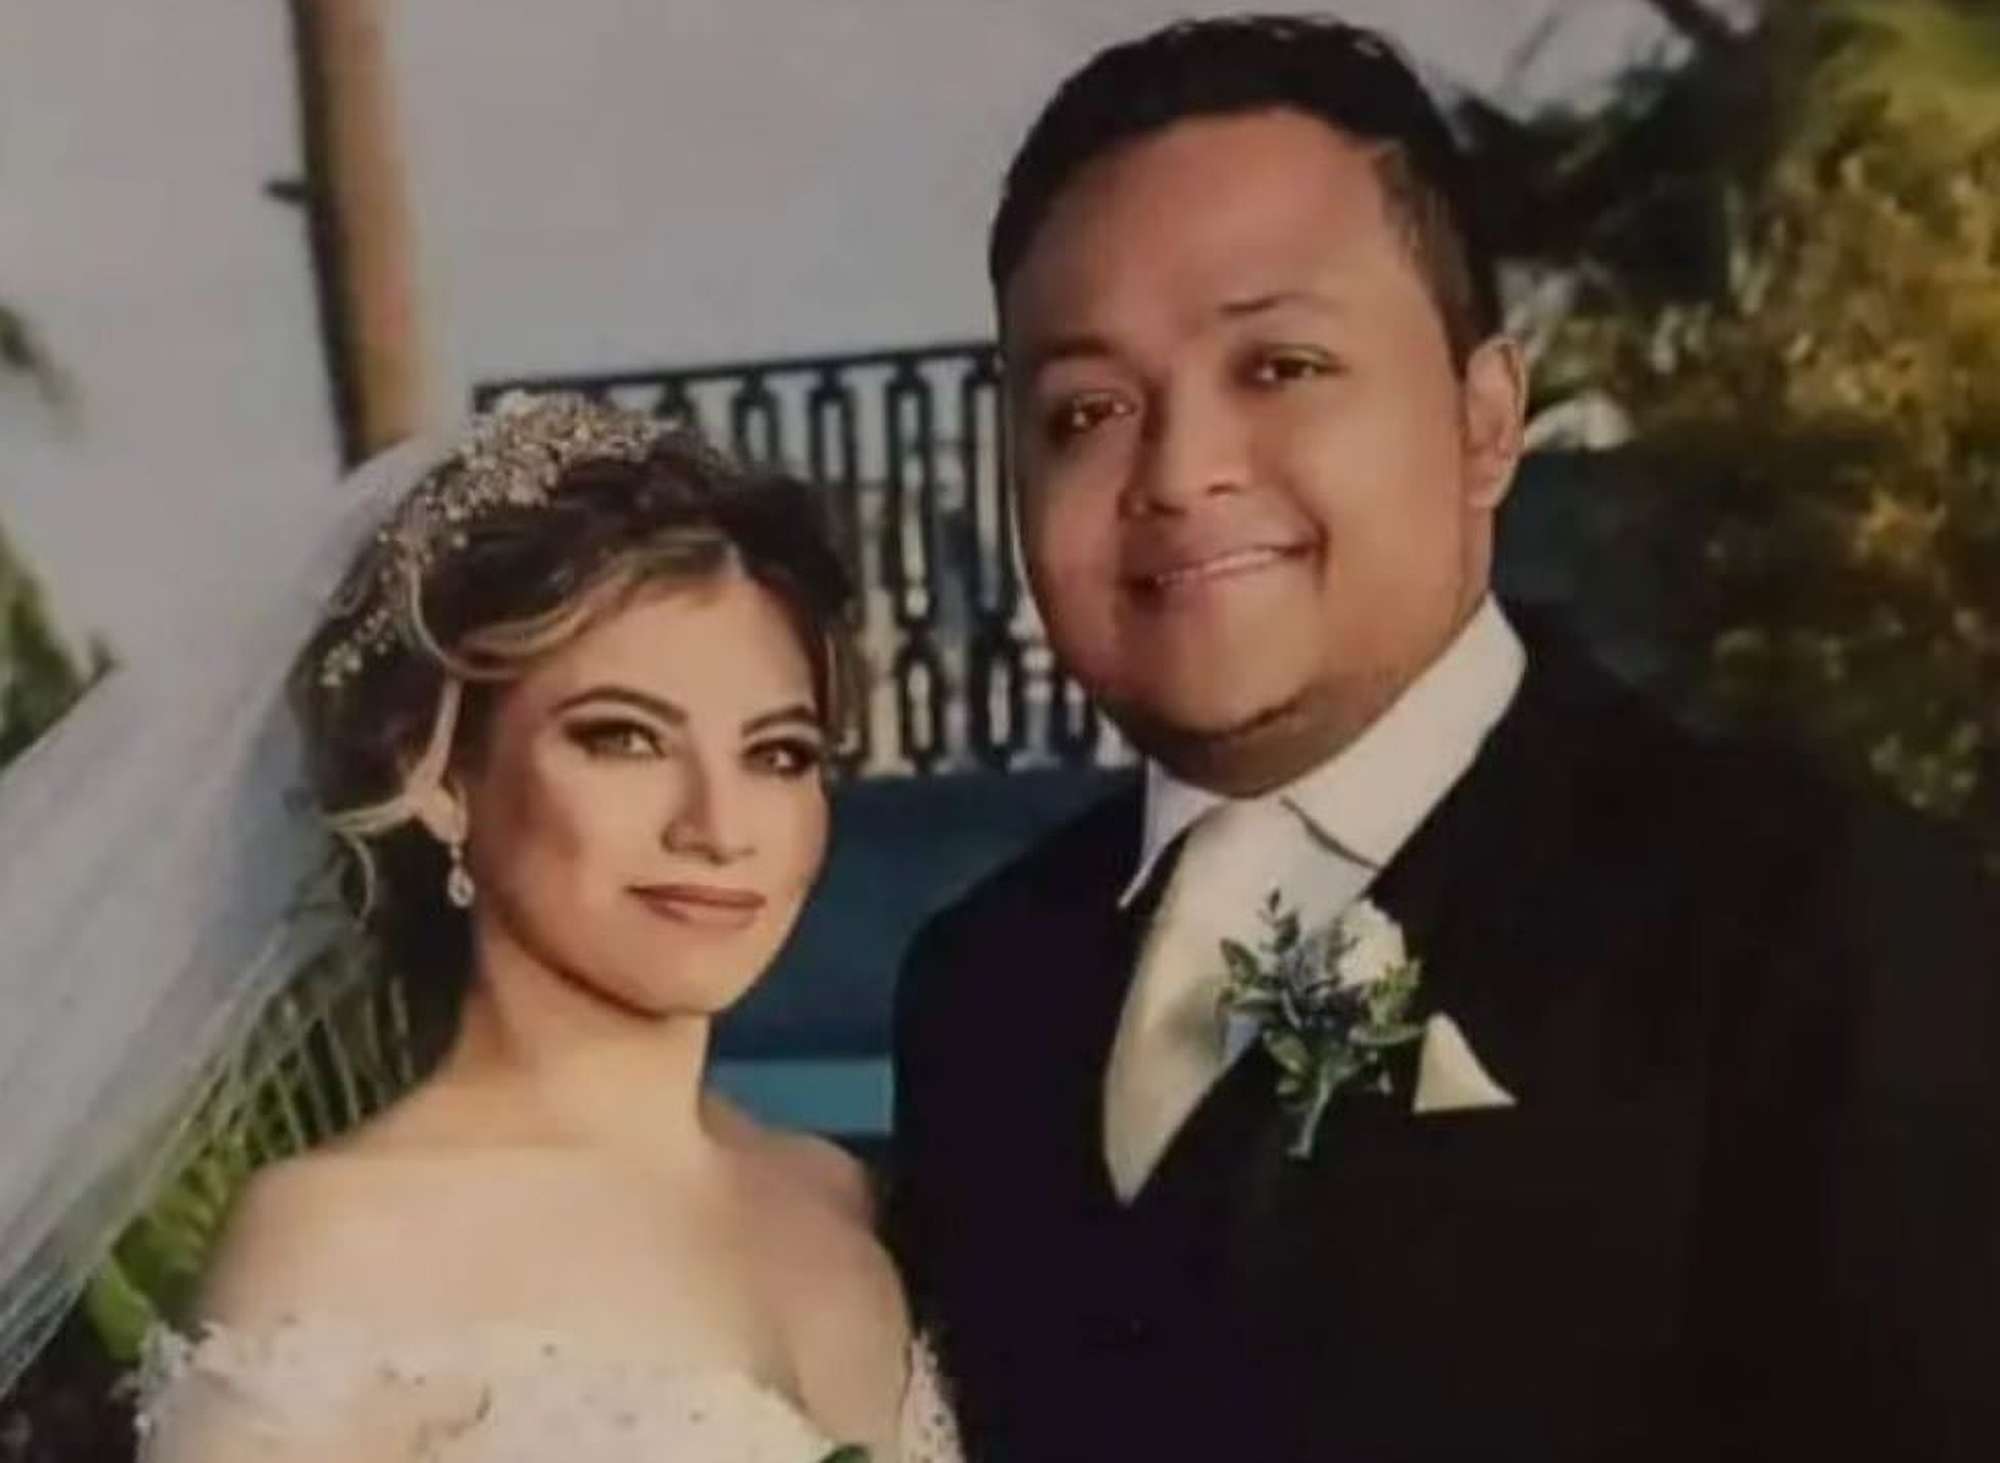 Read more about the article BLOOD WEDDING: Groom Smiles On Camera With New Wife Moment Before Being Gunned Down On Wedding Day